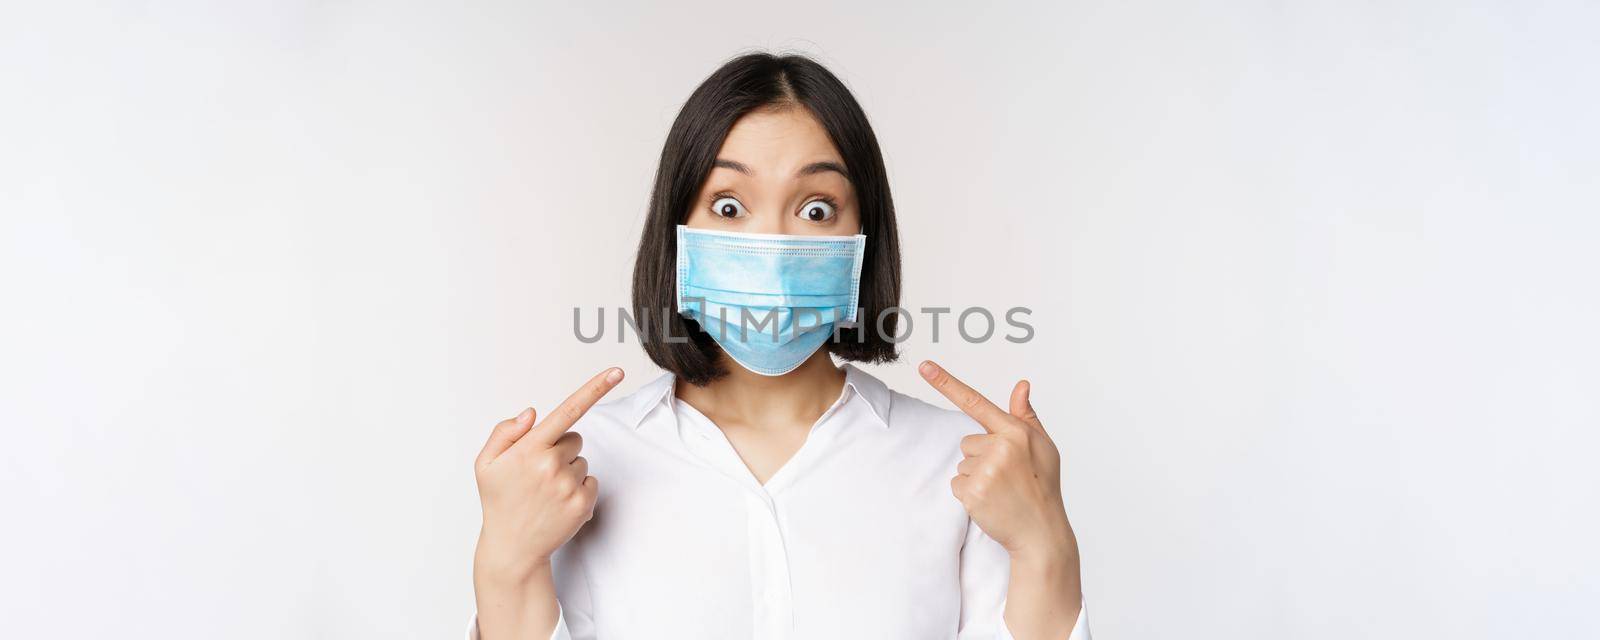 Image of amazed young asian woman pointing at herself while wearing medical face mask, standing over white background.